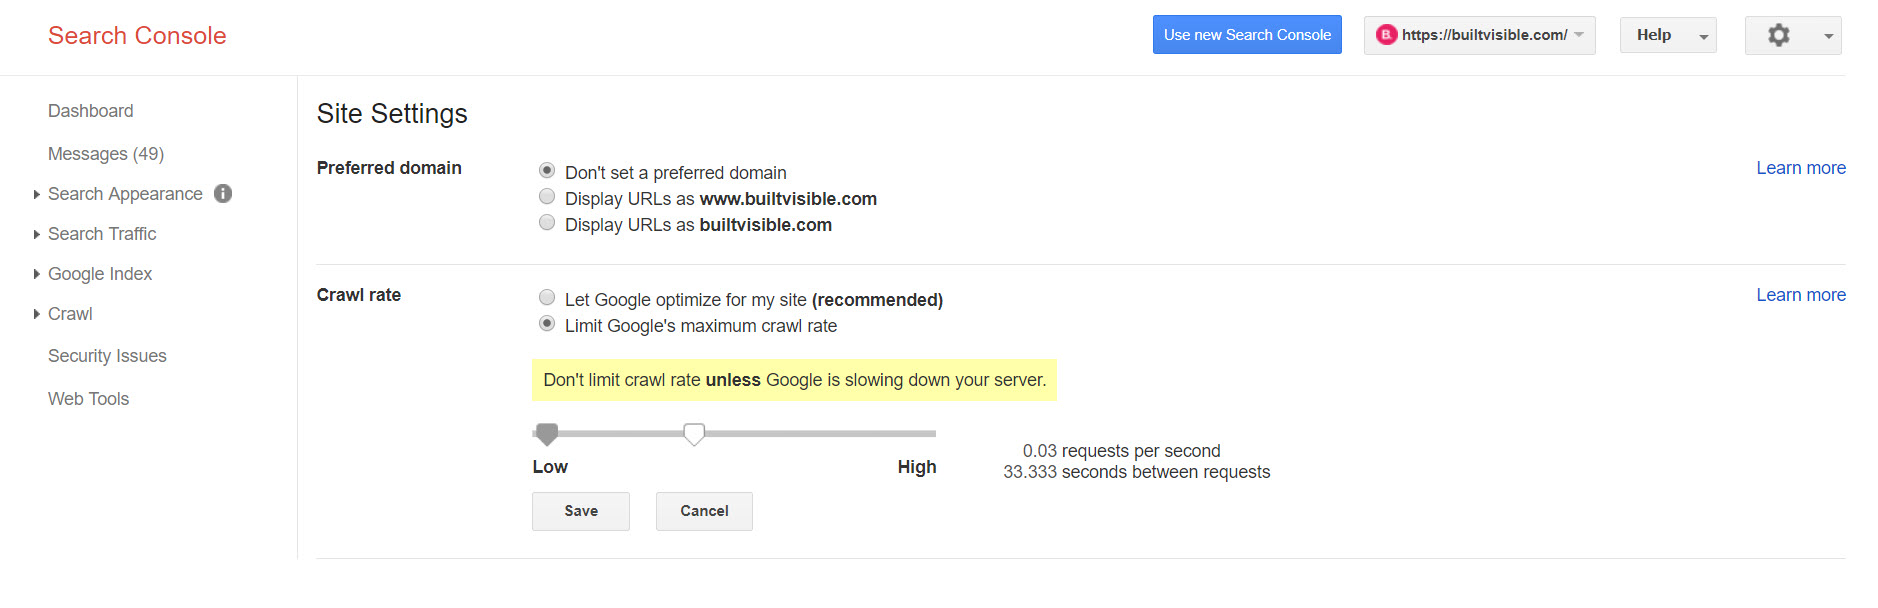 update crawl settings in the old search console